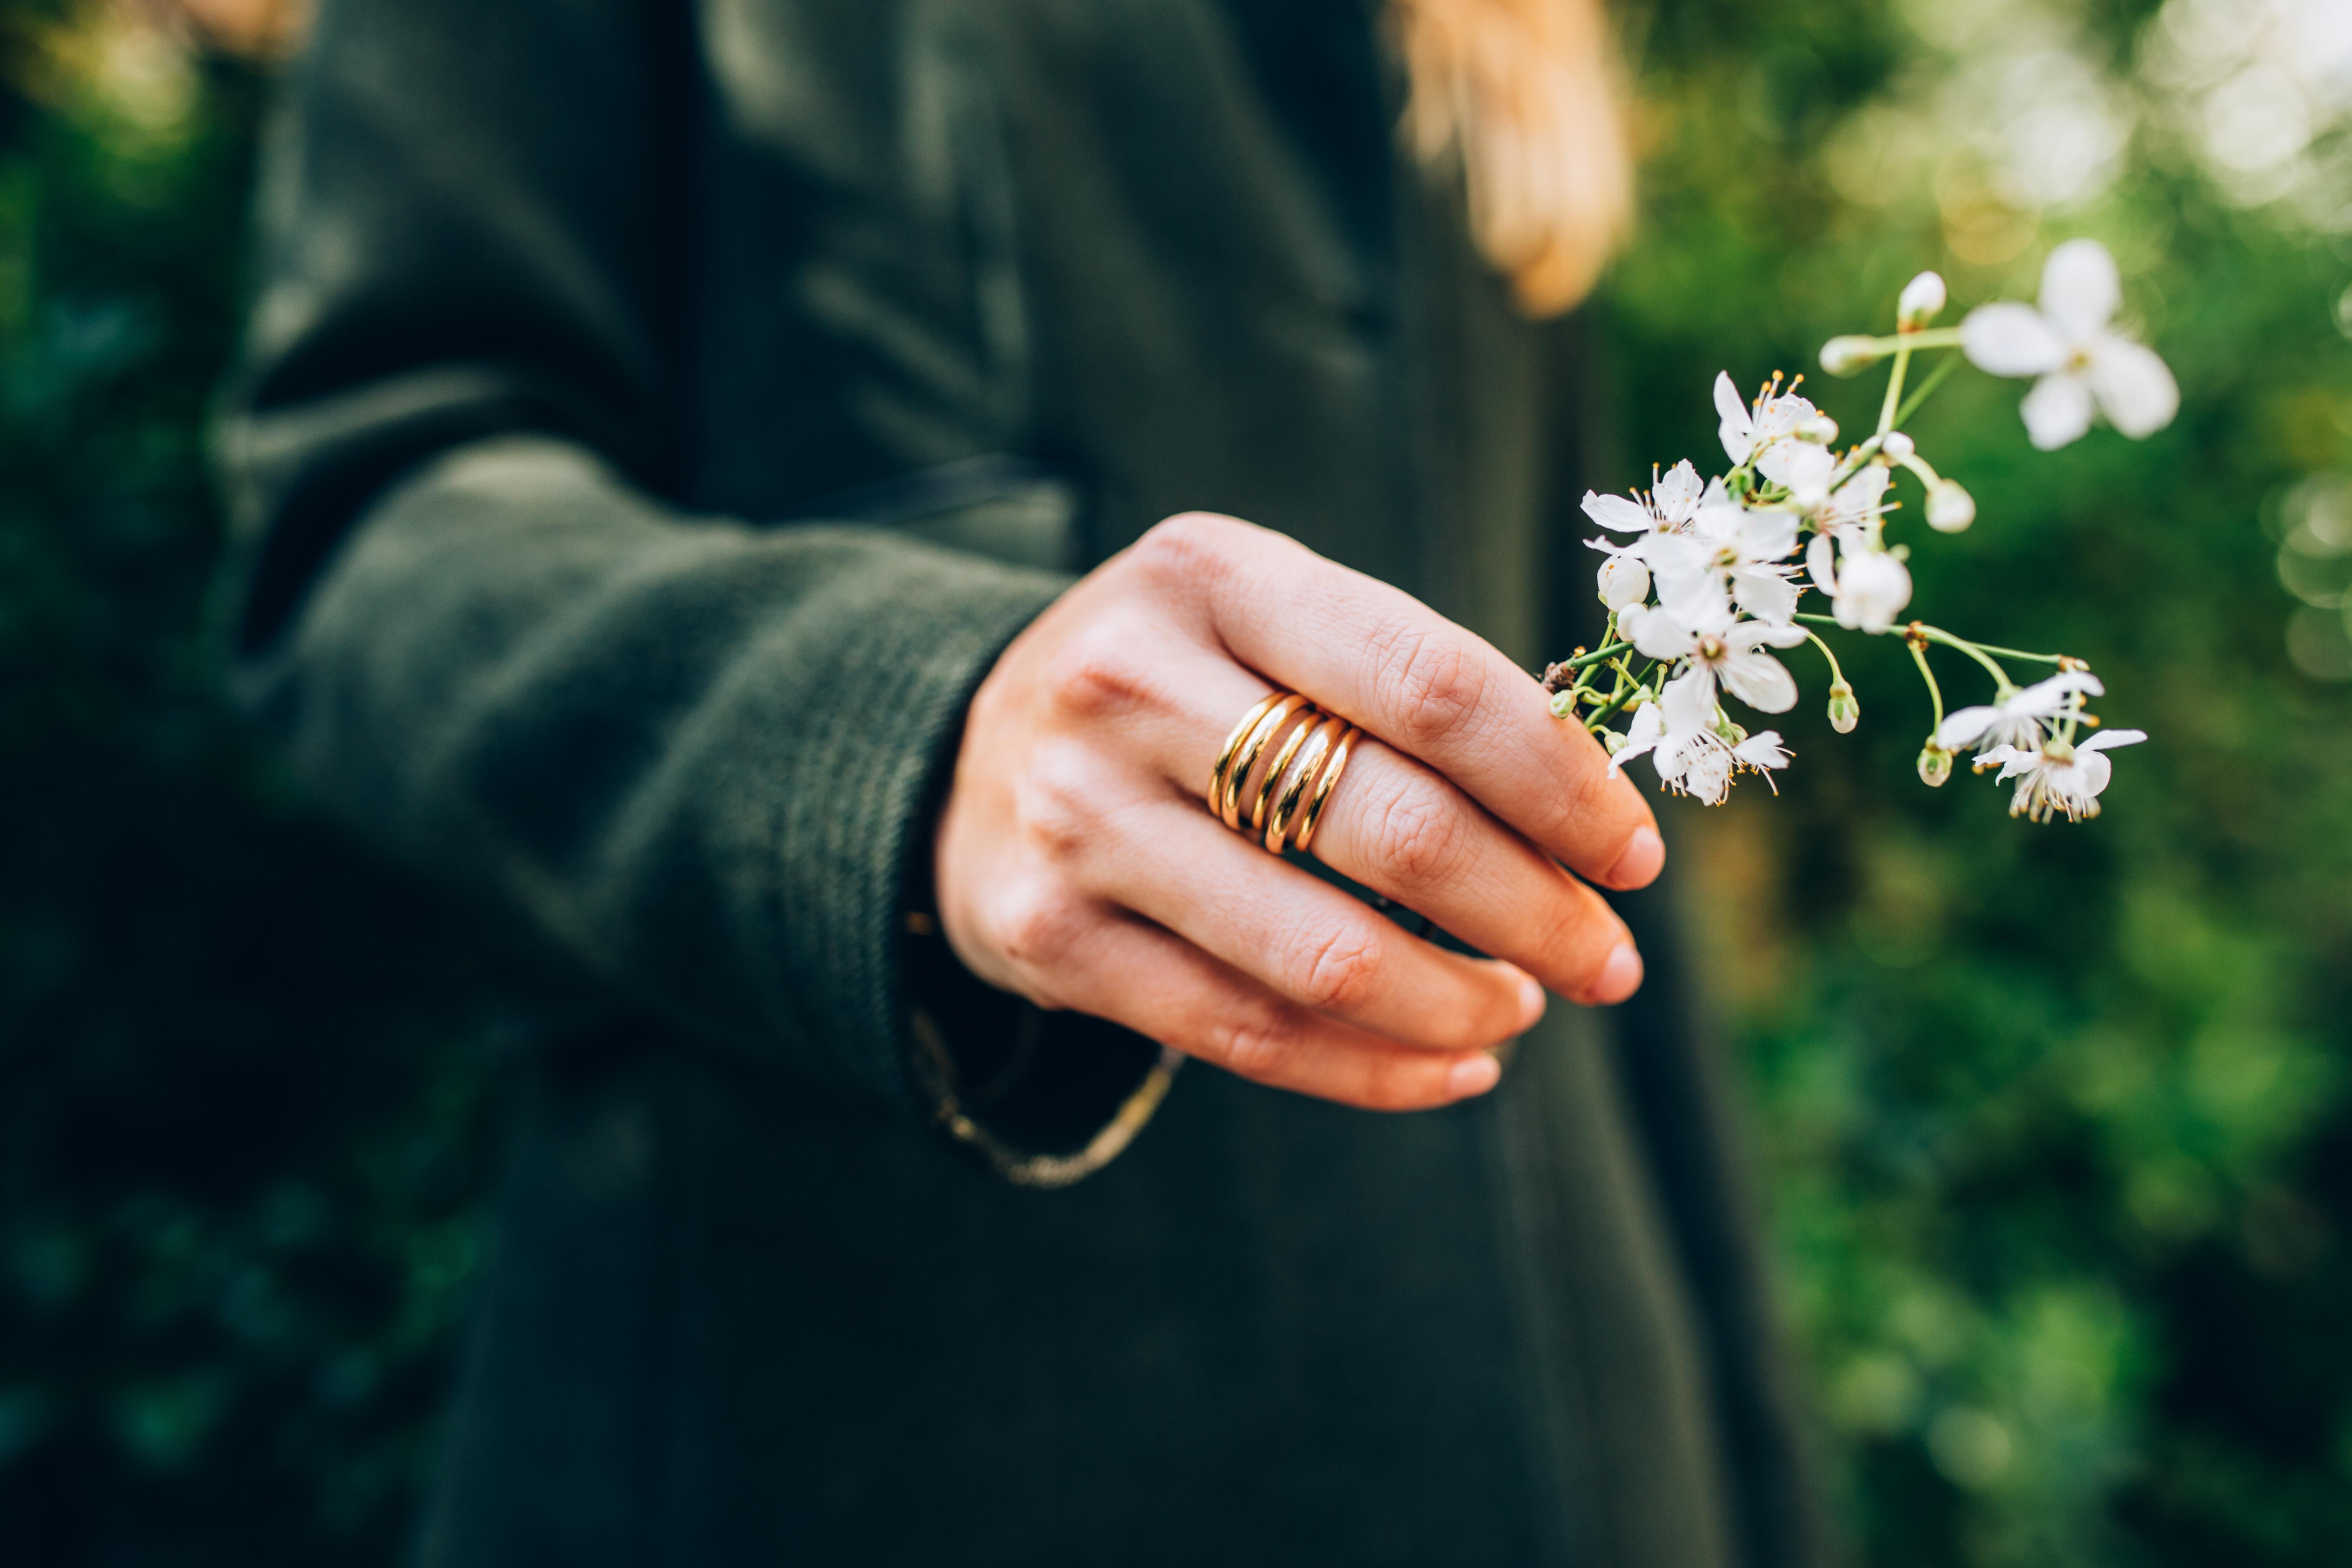 The 5 band 18 Karat gold Berlin ring is a stylish piece of jewellery for all occasions. Modern and comfortably wearable but also makes a strong statement. 

Designed and handcrafted in the UK. 

- 18 karat Yellow Gold

Order today and start building